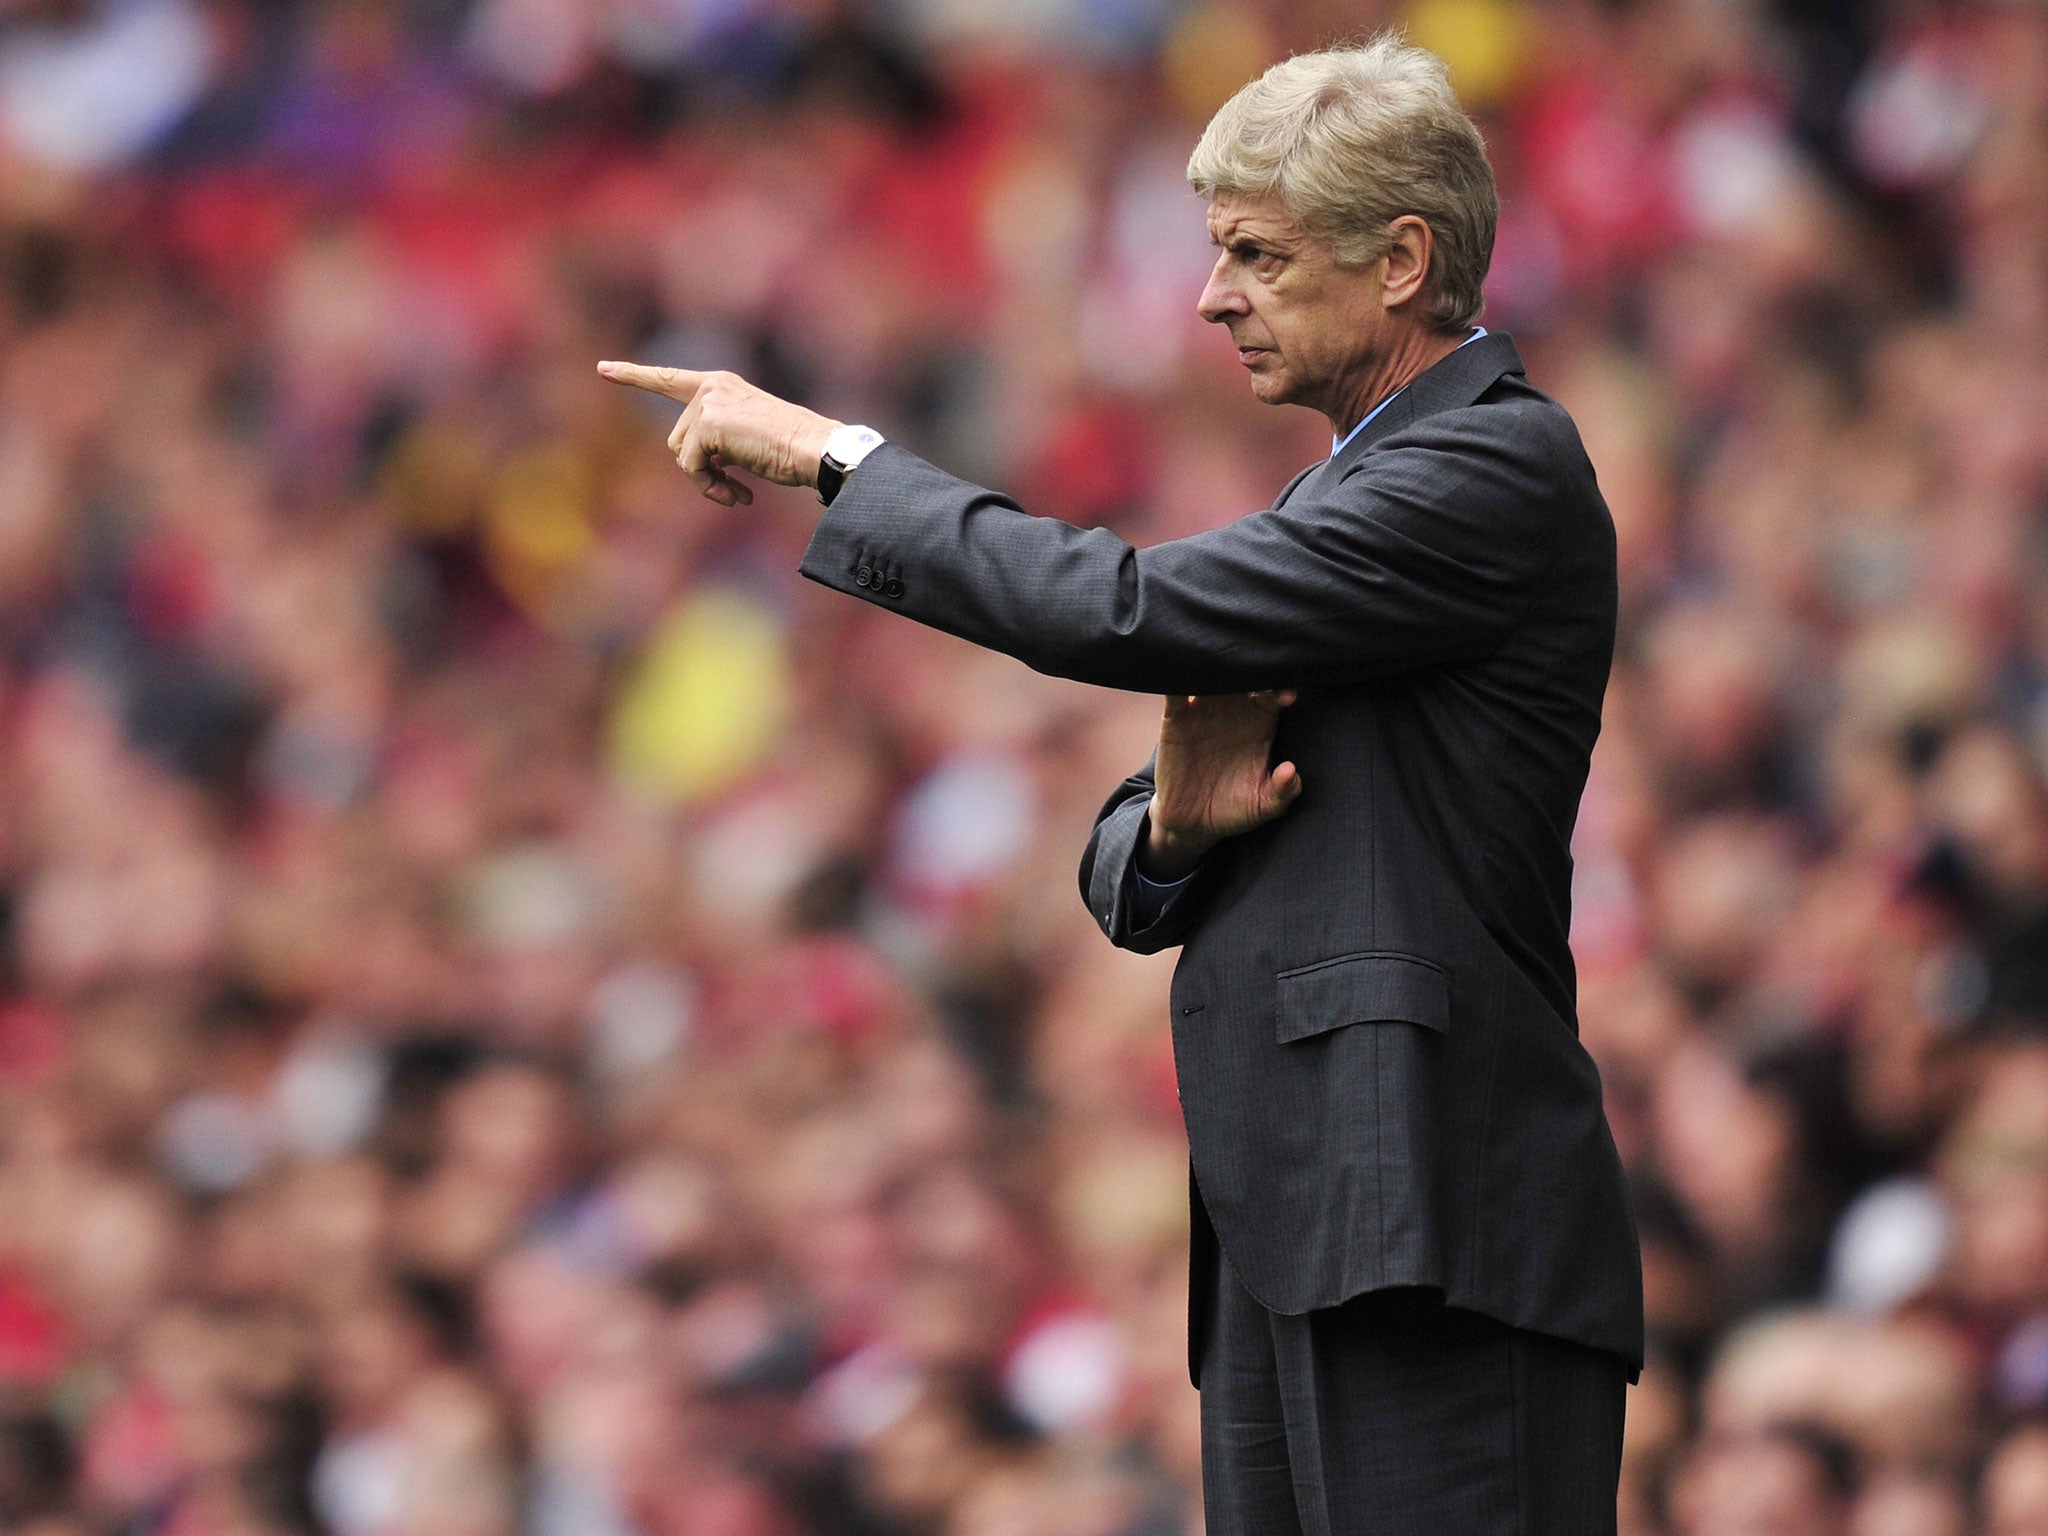 Arsenal manager Arsène Wenger said he is prepared to strengthen his squad before the end of the transfer window